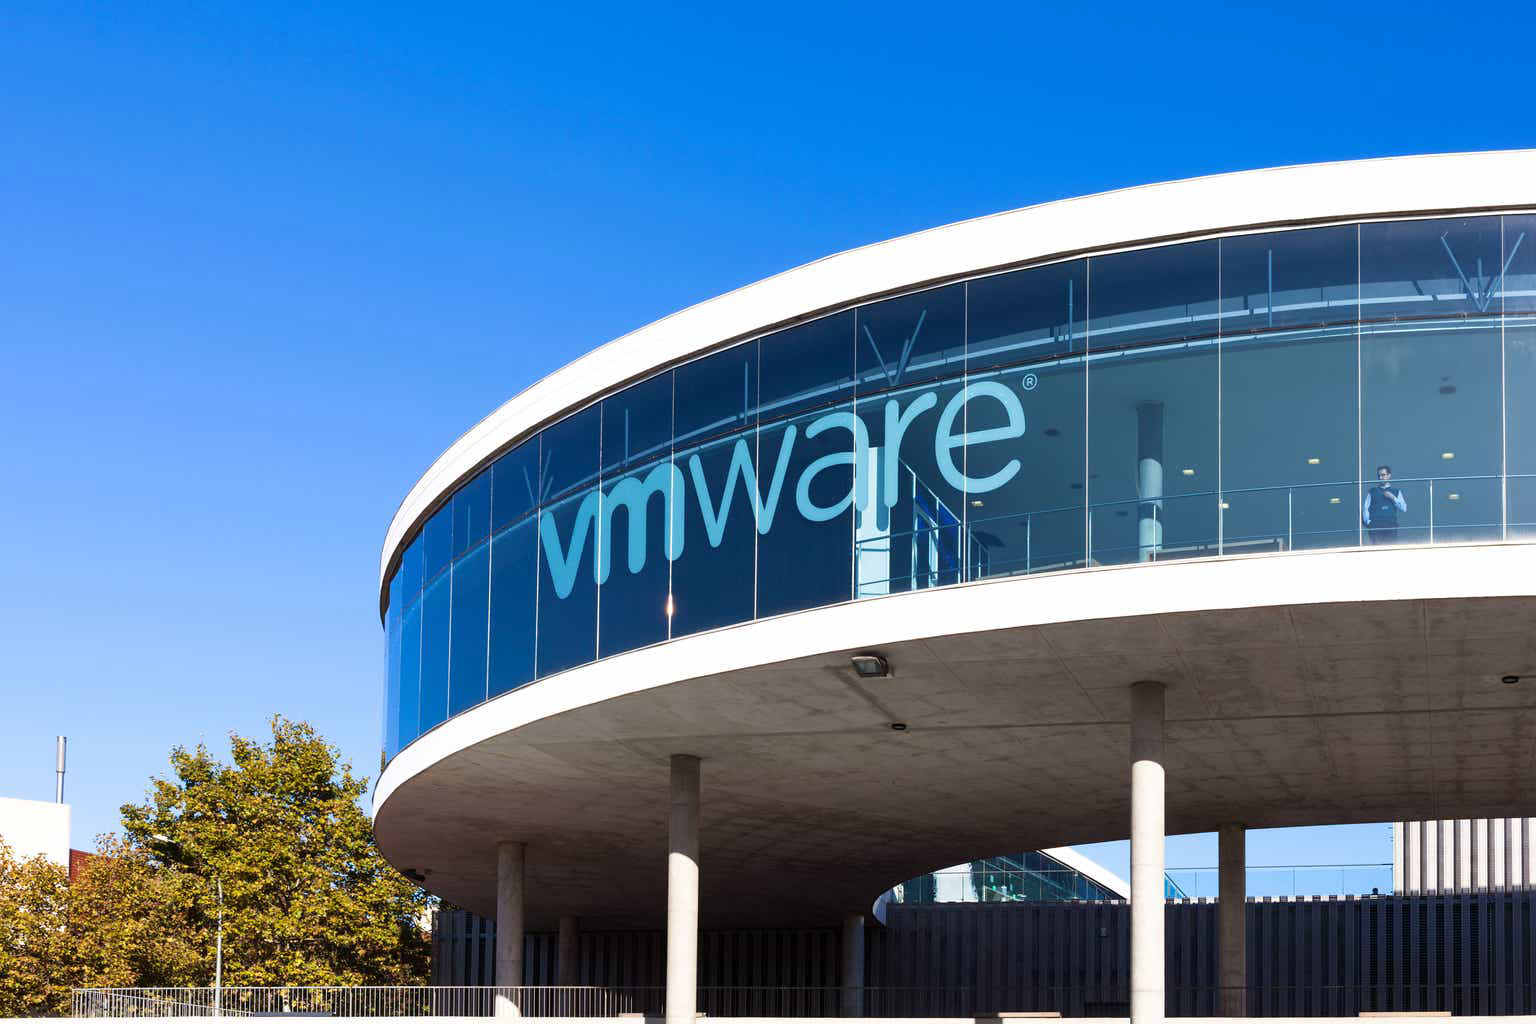 4 stocks to watch on Monday Kenvue, VMware and more